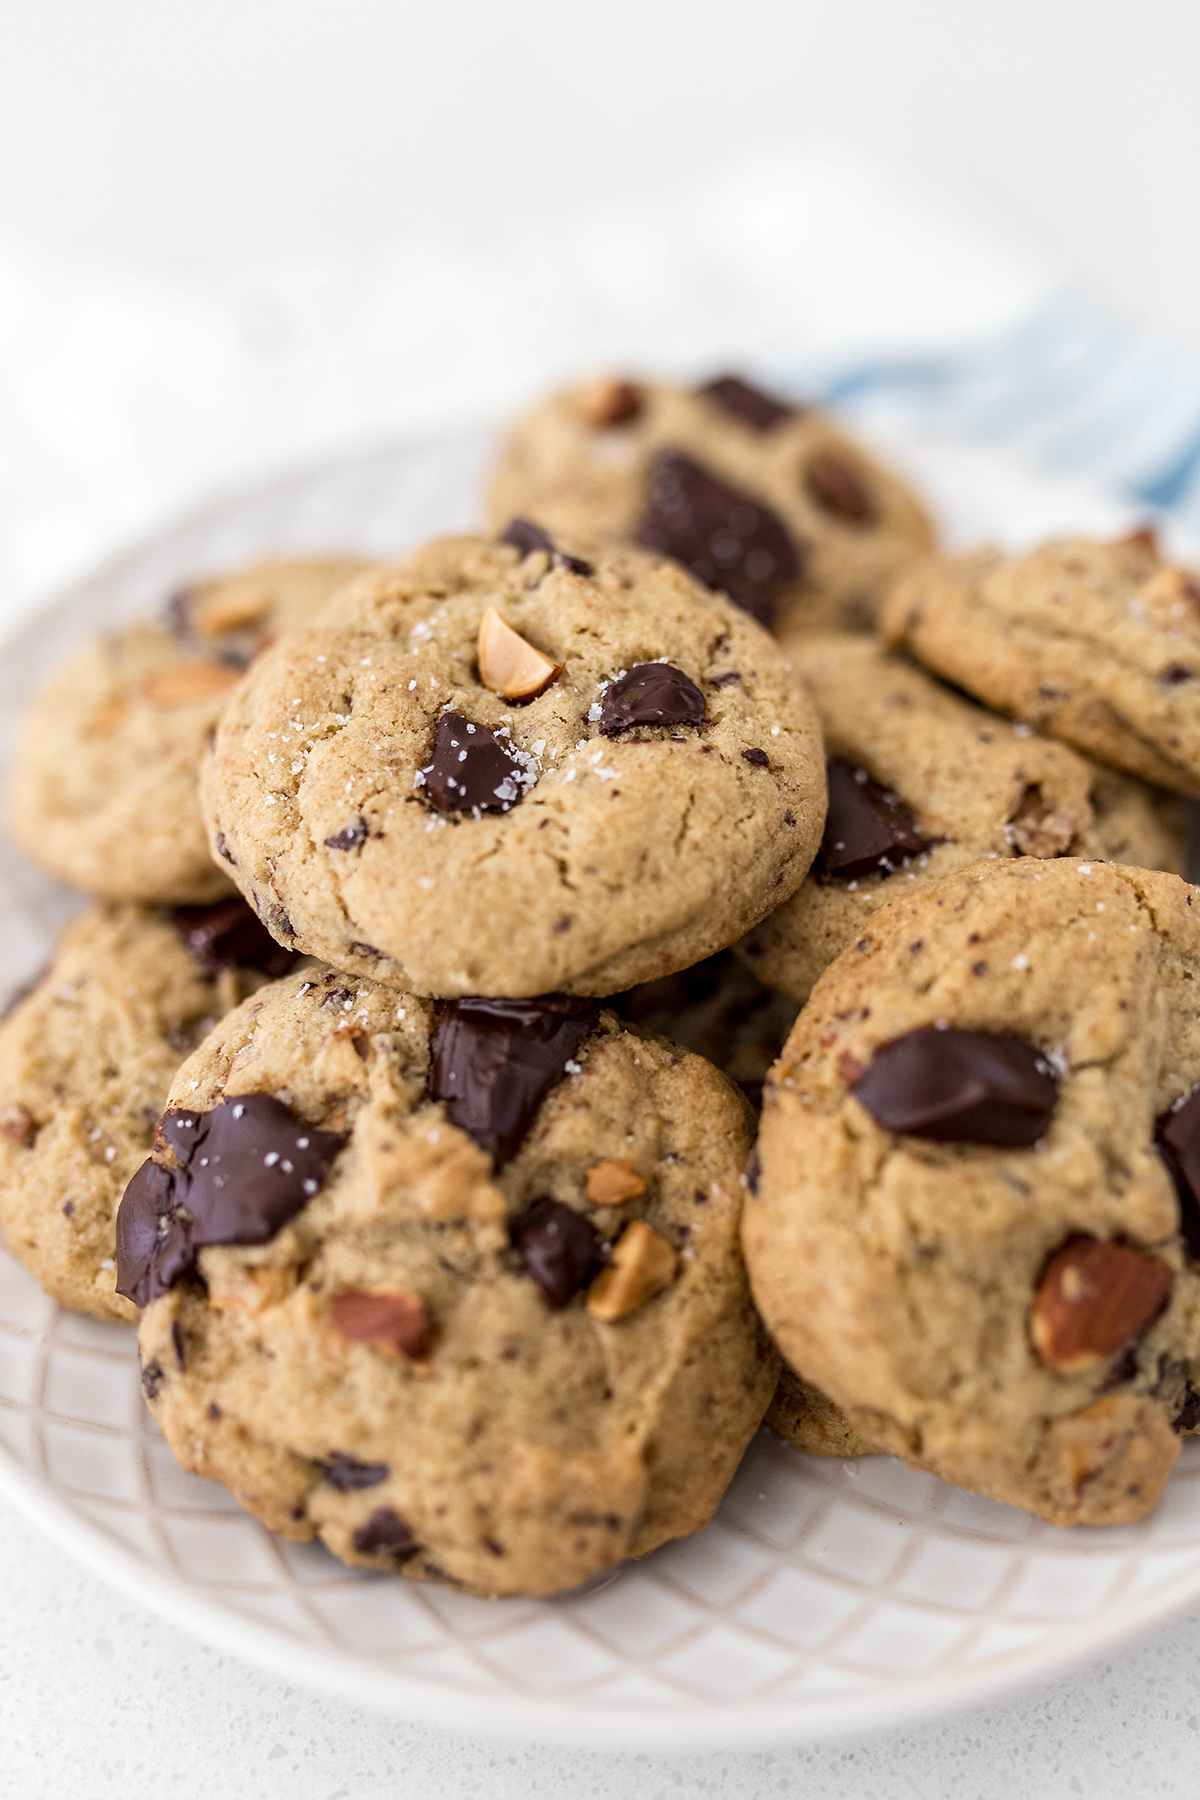 A plate of chocolate chip almond cookies.